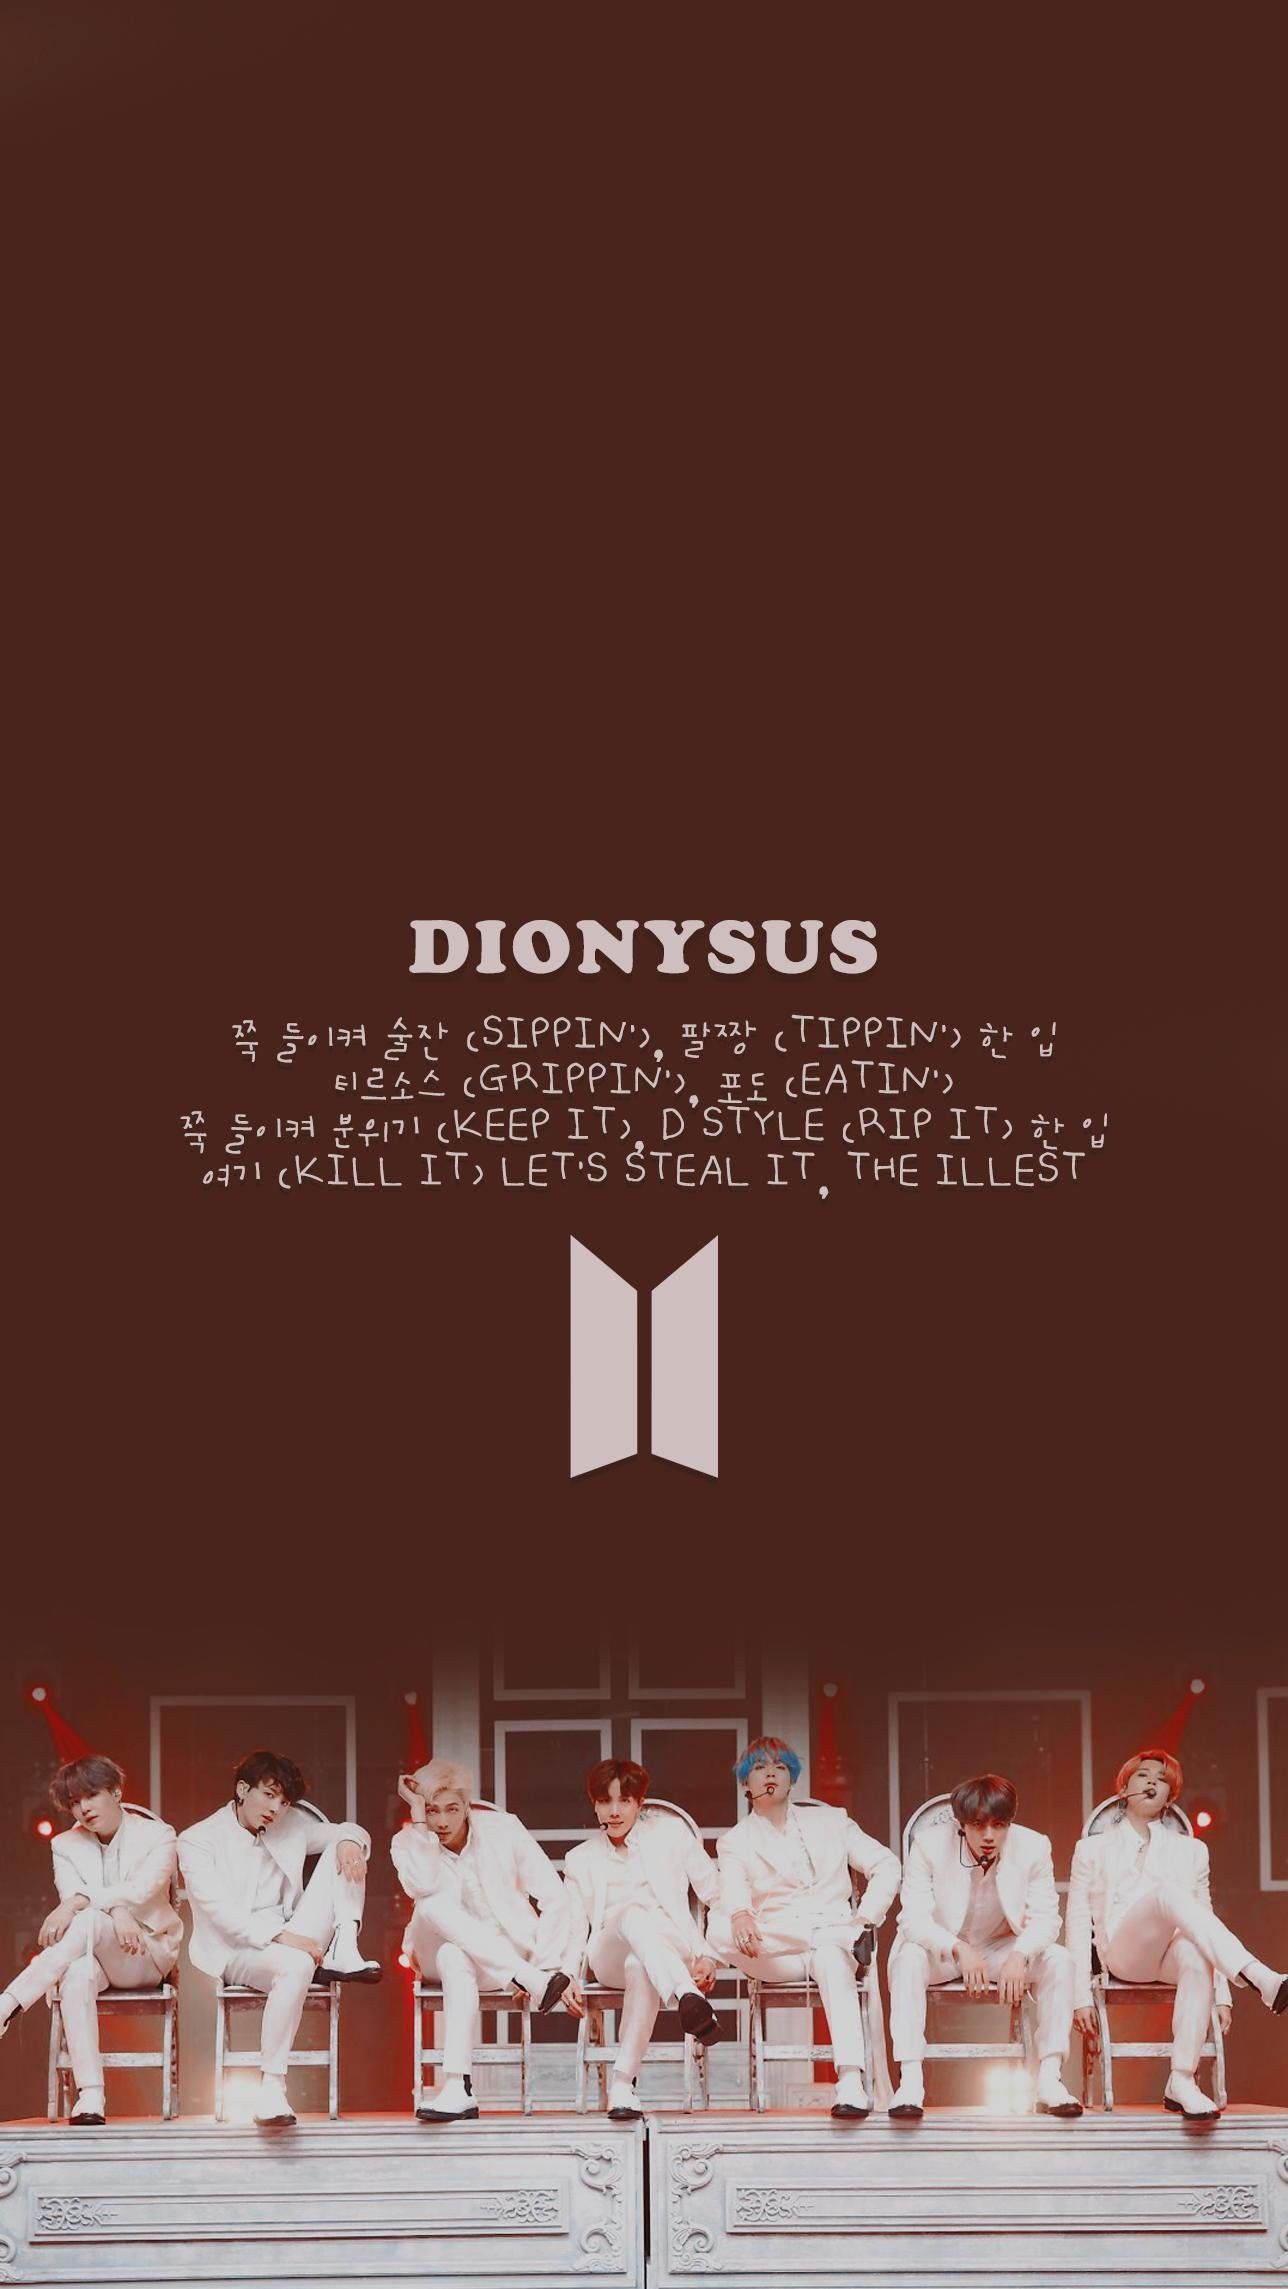 Bts dionysus wallpapers background beautiful best available for download bts dionysus photos free on images